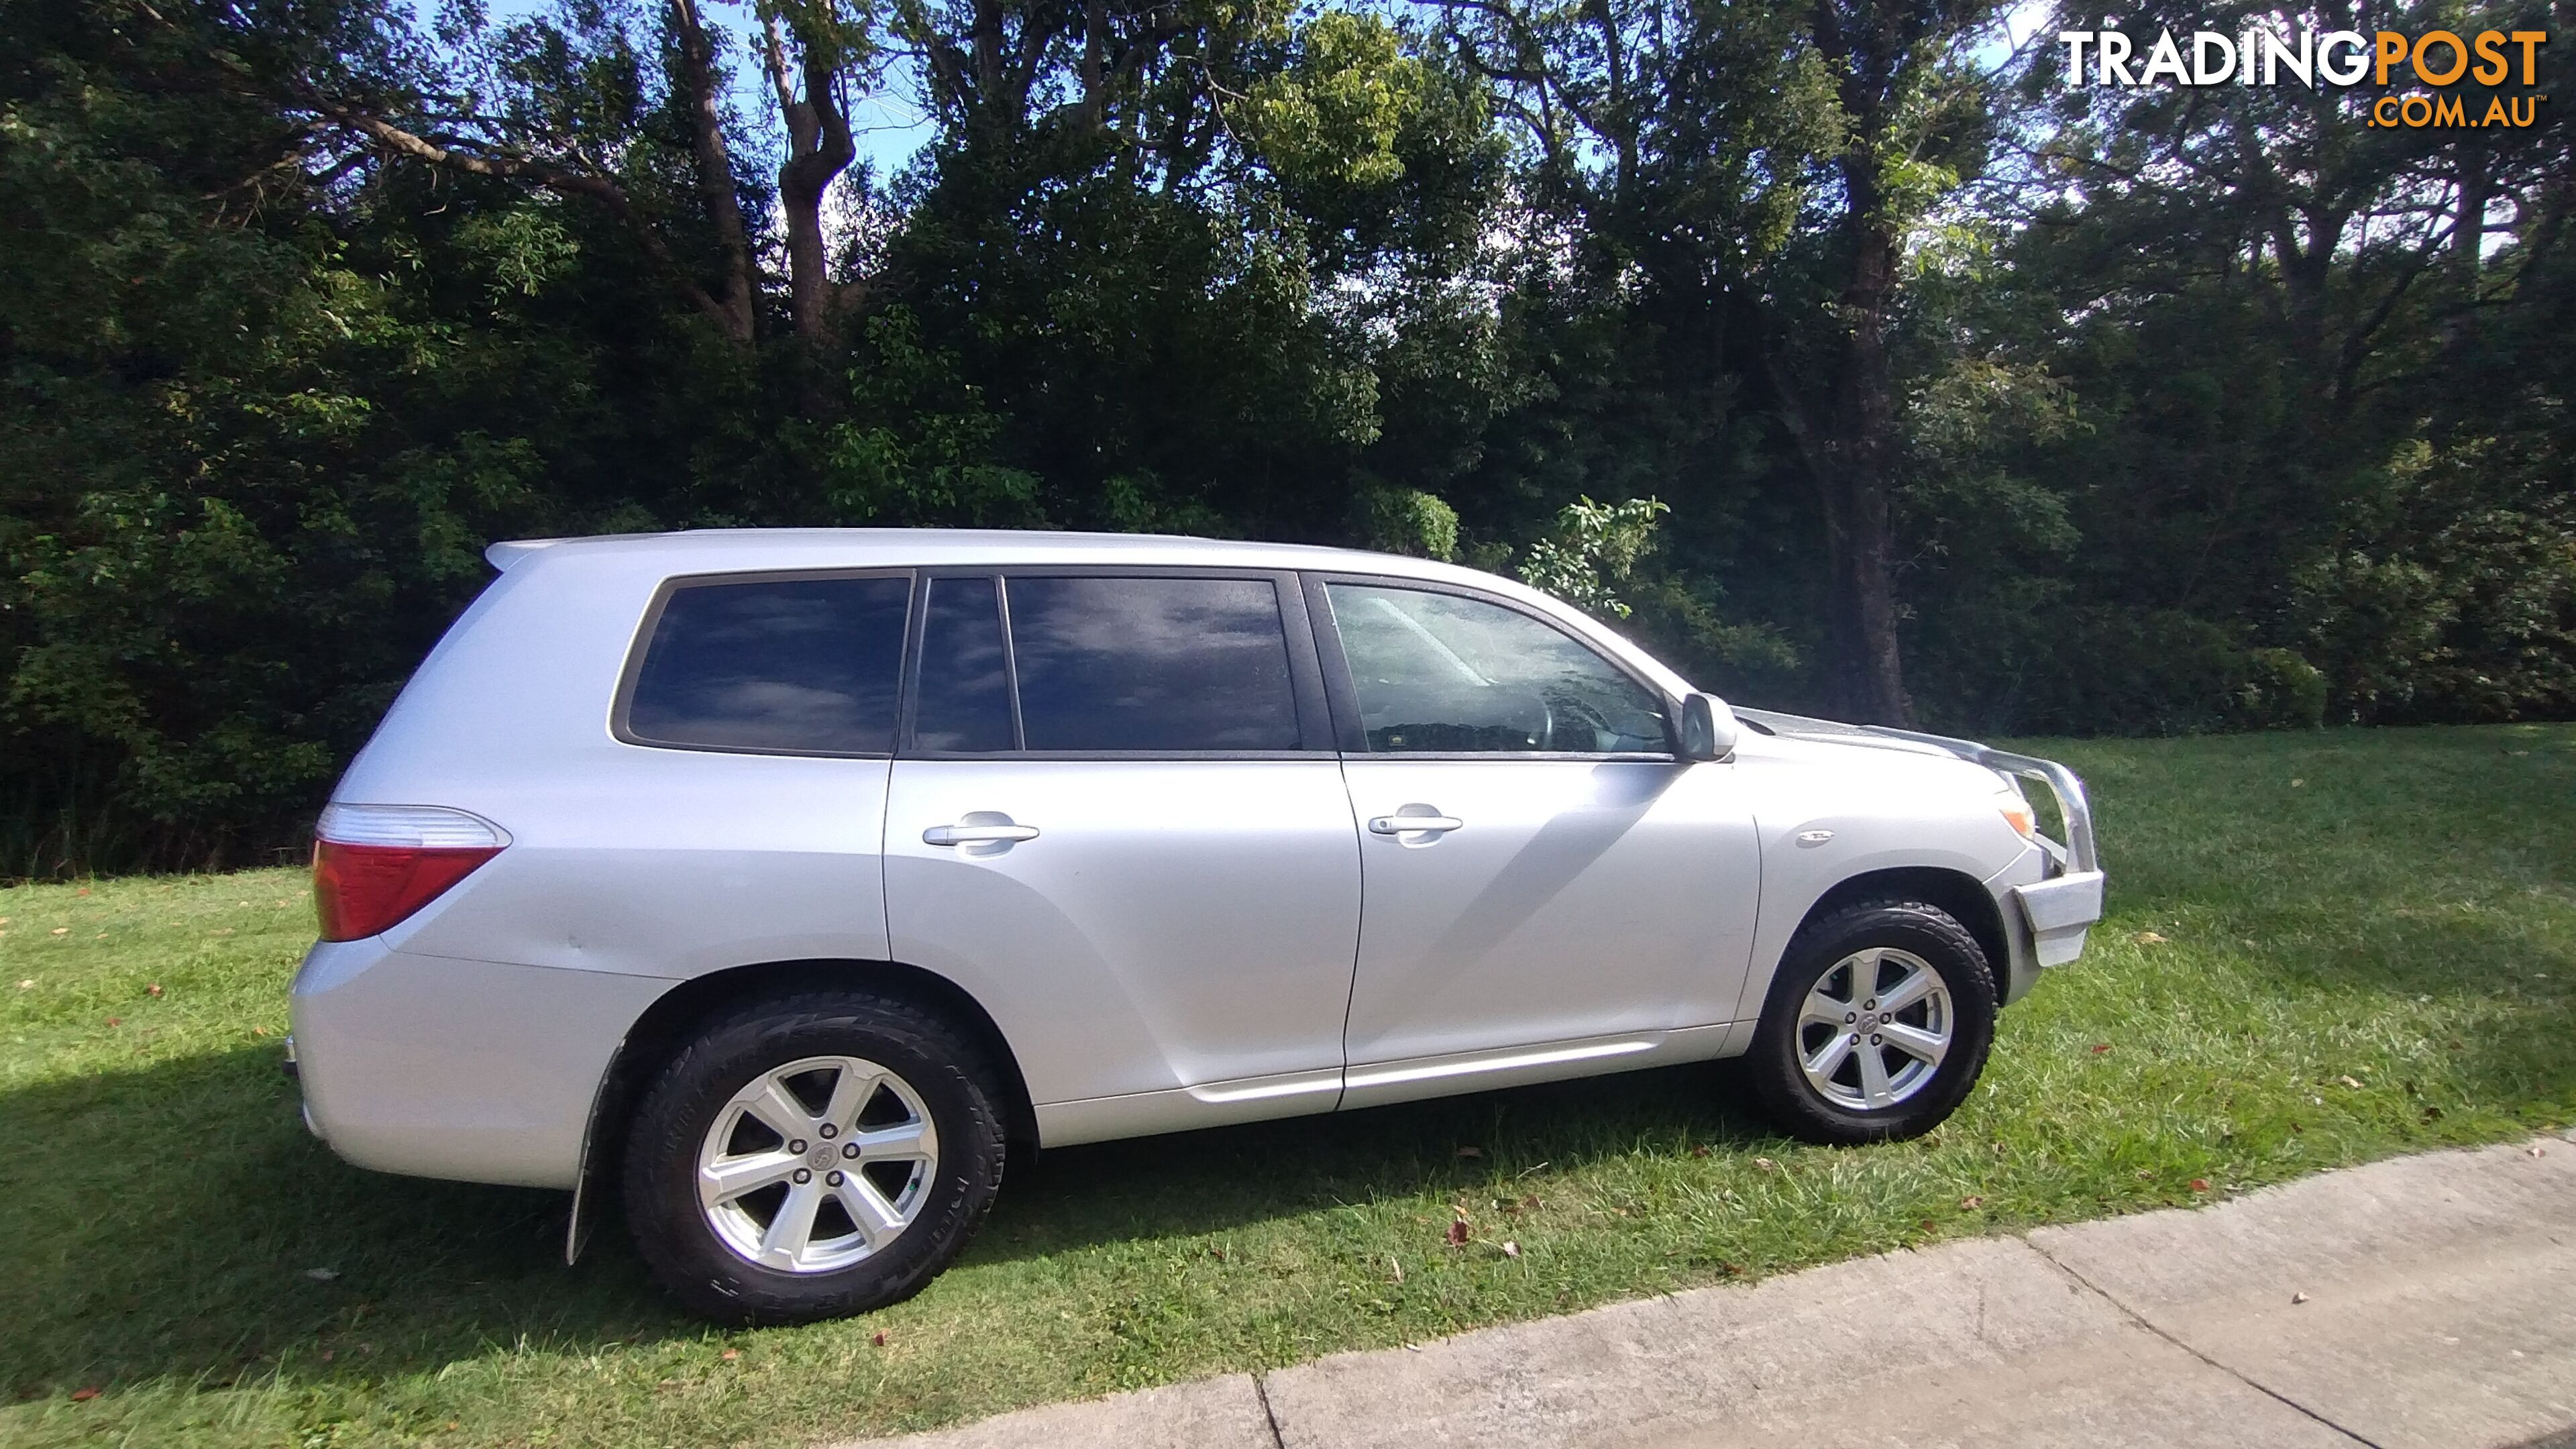 2007 Toyota Kluger KX7 SUV Wagon 7 Seater